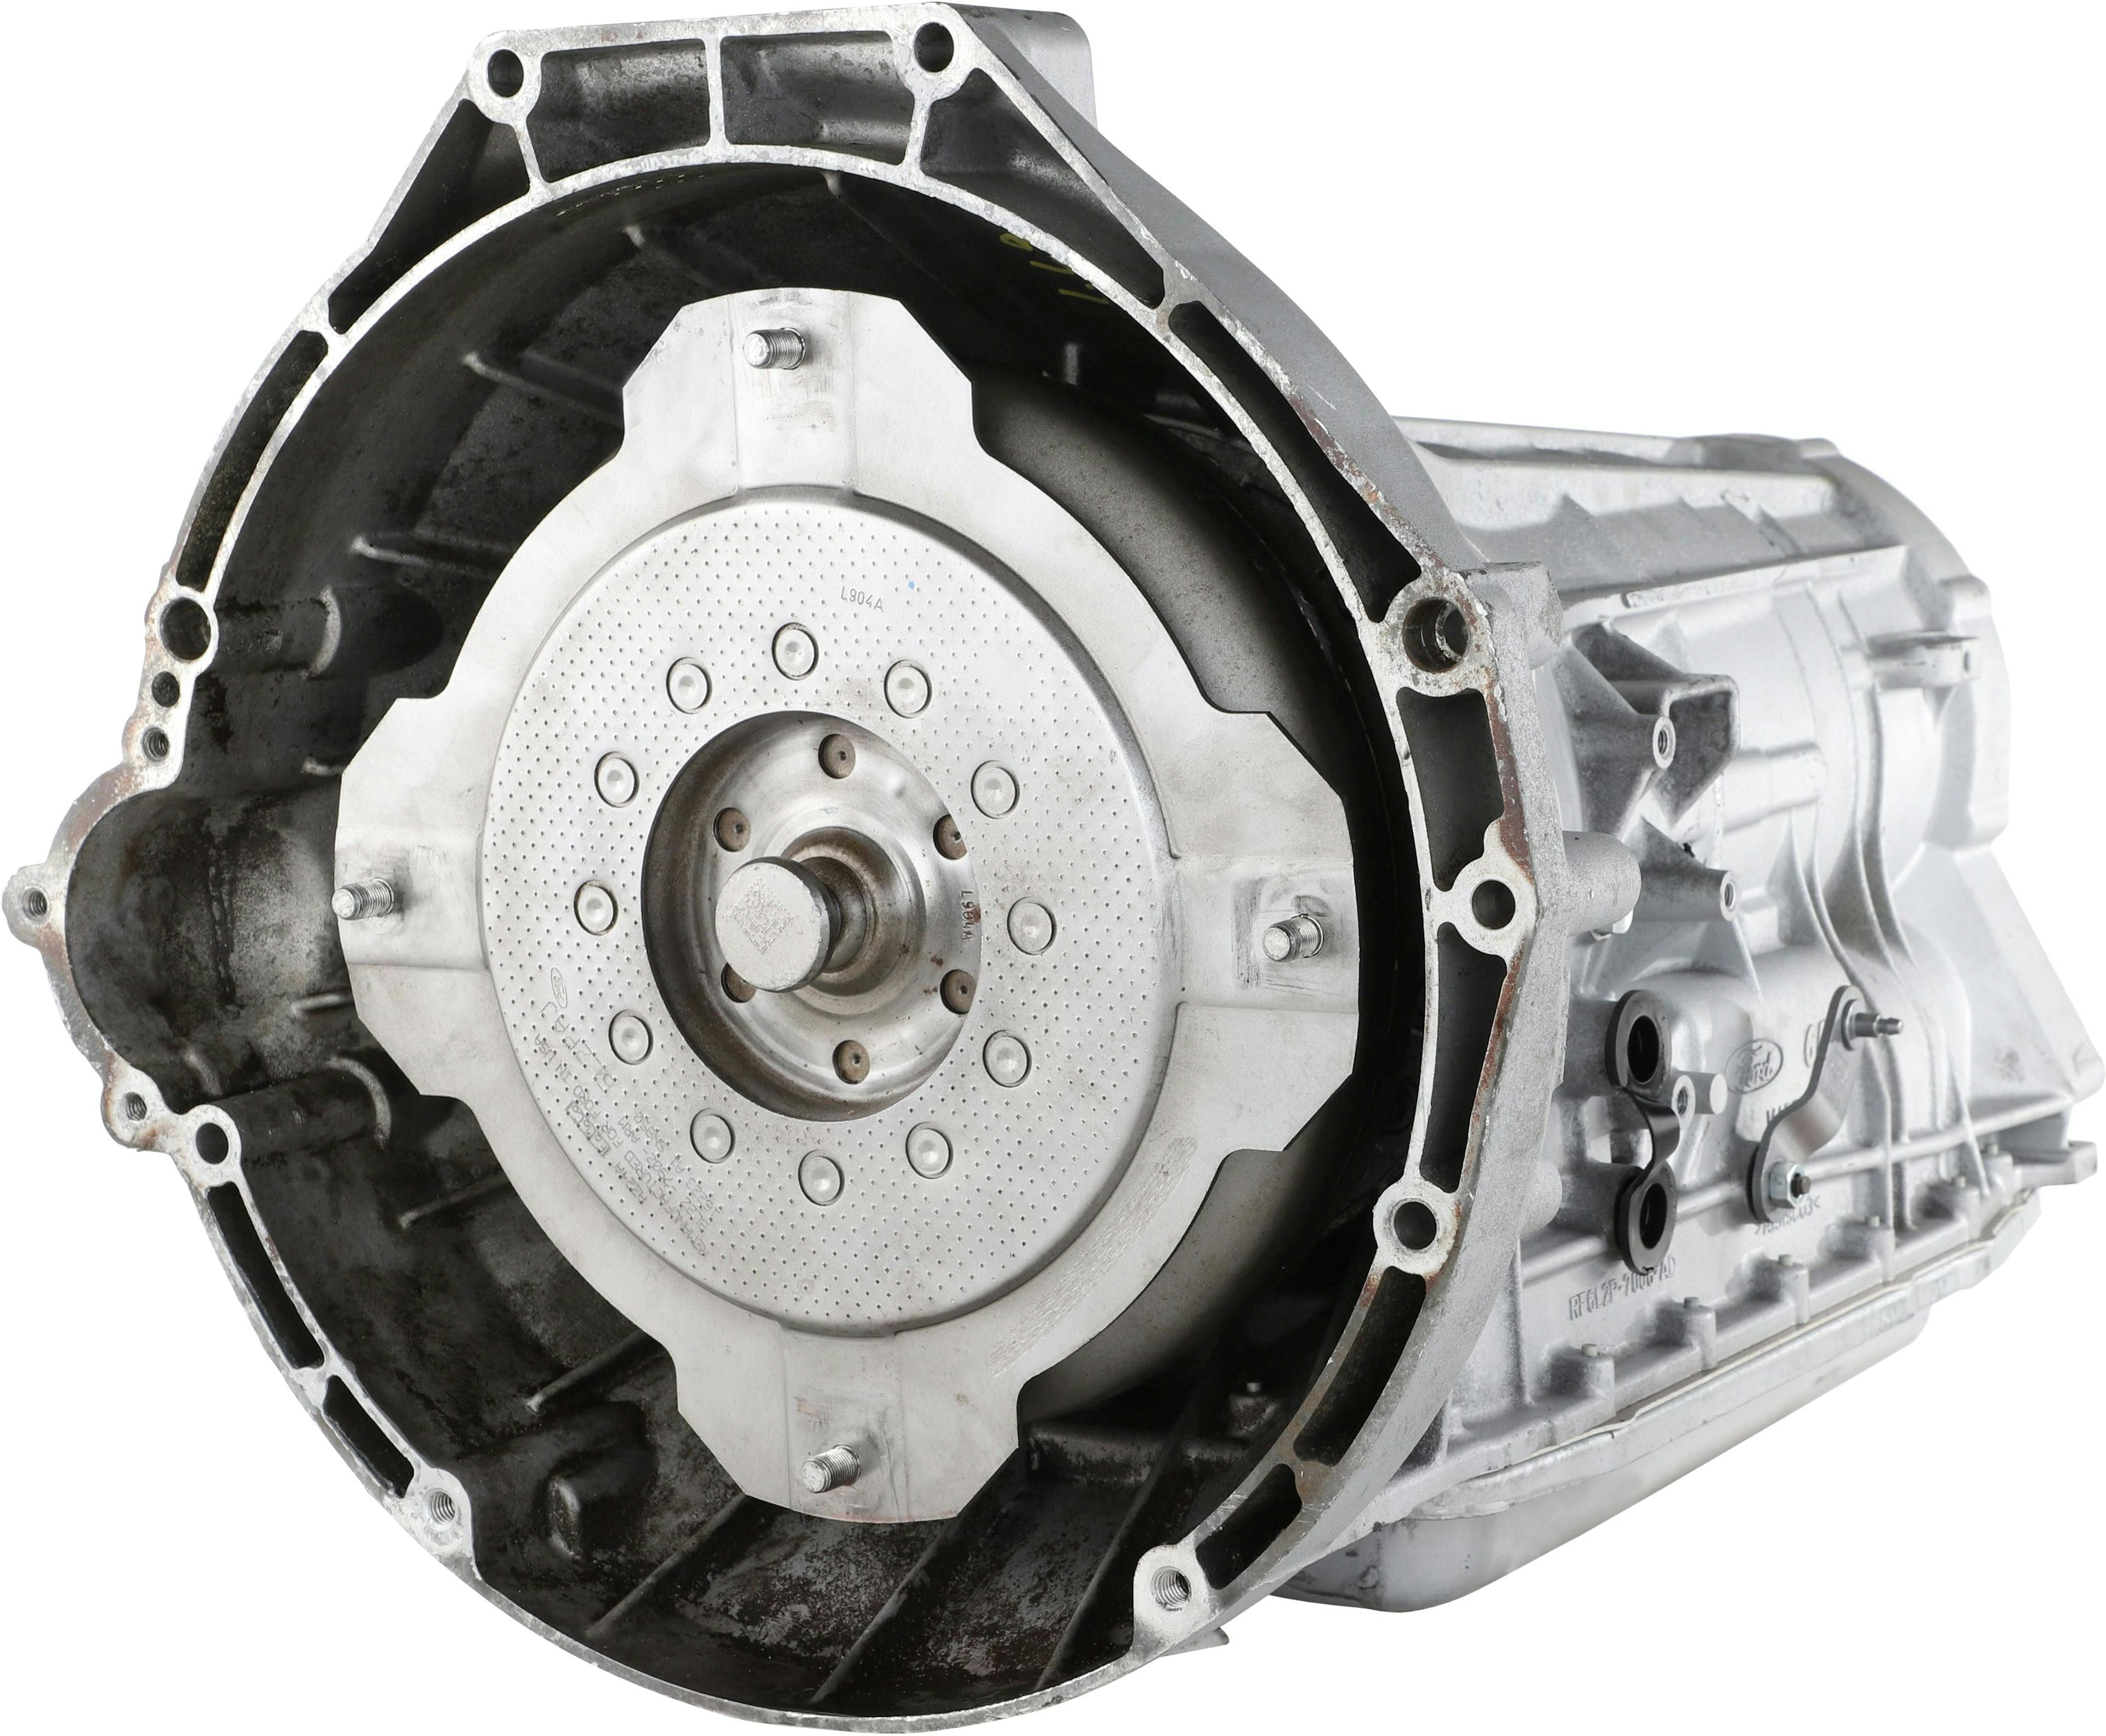 Automatic Transmission for 2006-2007 Ford Explorer/Explorer Sport Trac and Mercury Mountaineer 4WD with 4.6L V8 Engine